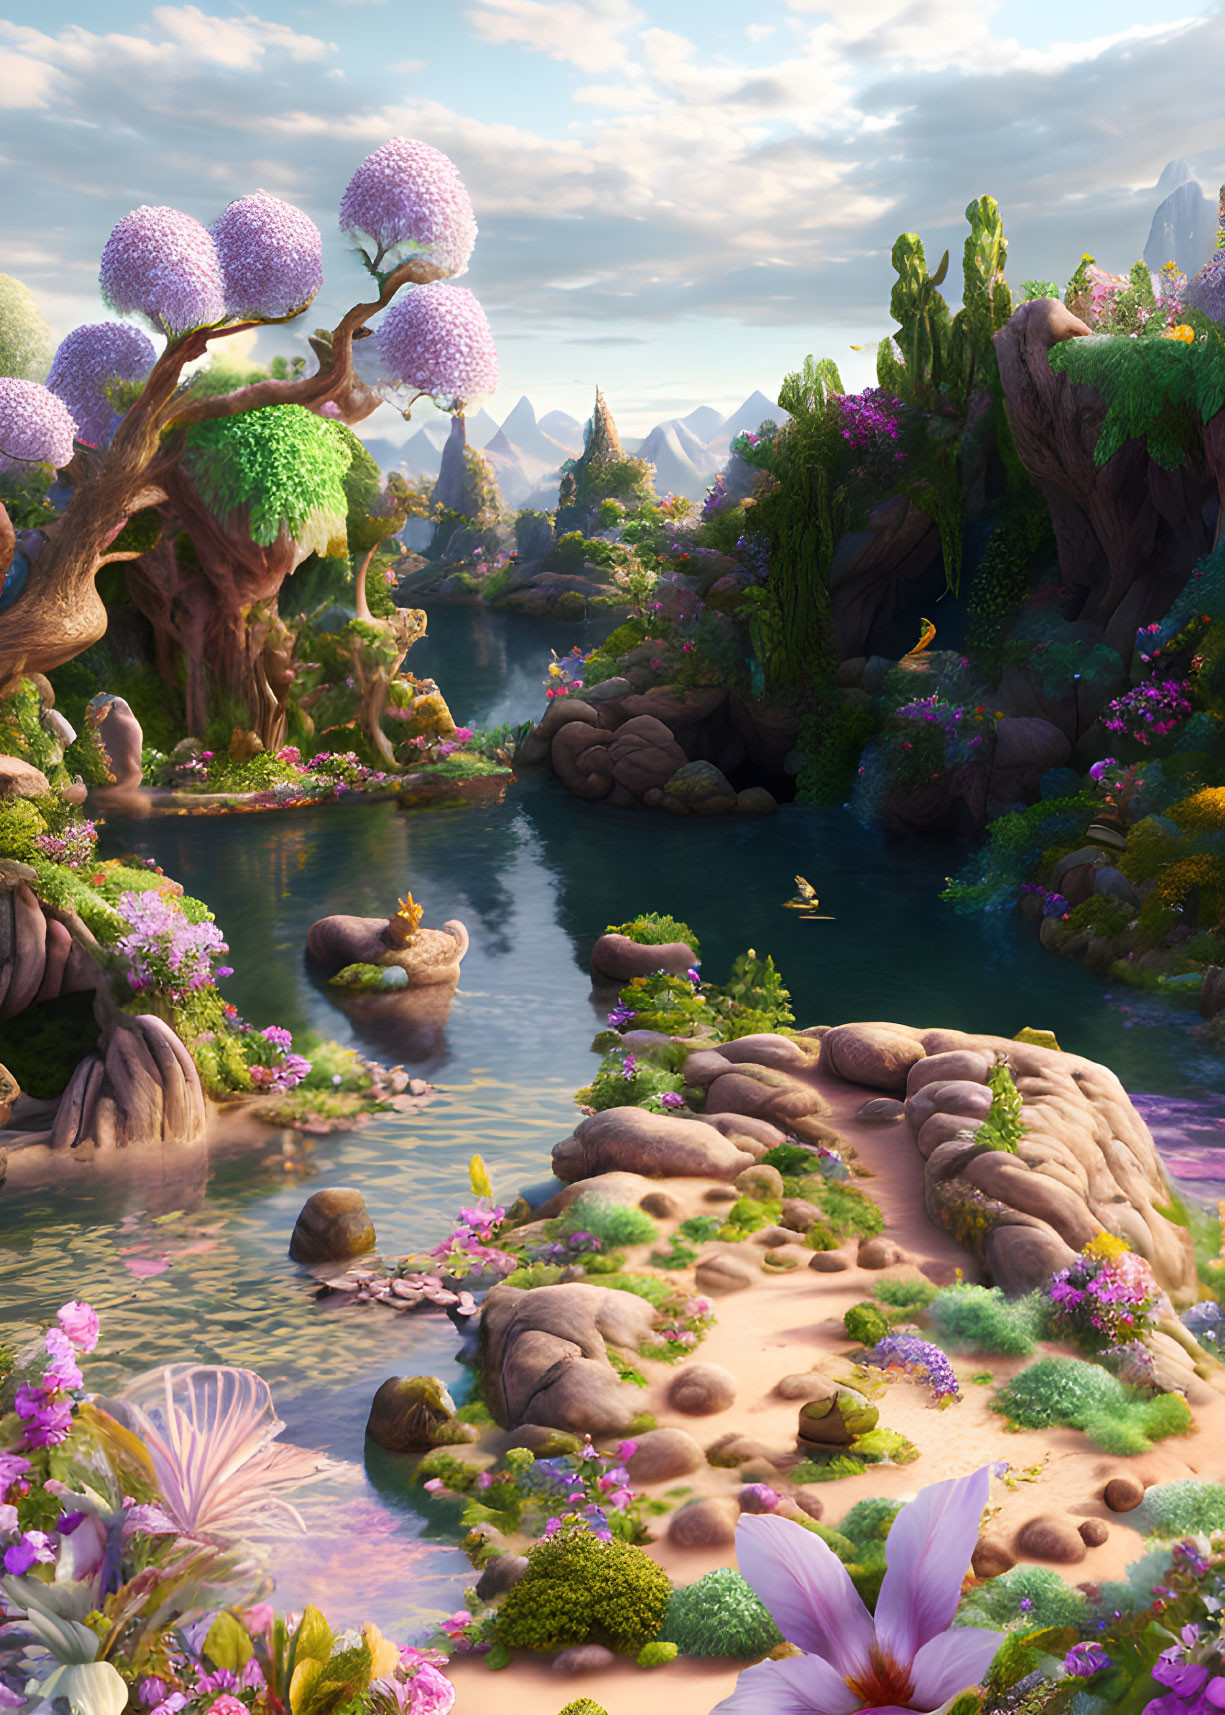 Tranquil fantasy landscape with purple trees, river, rocks, and mountains